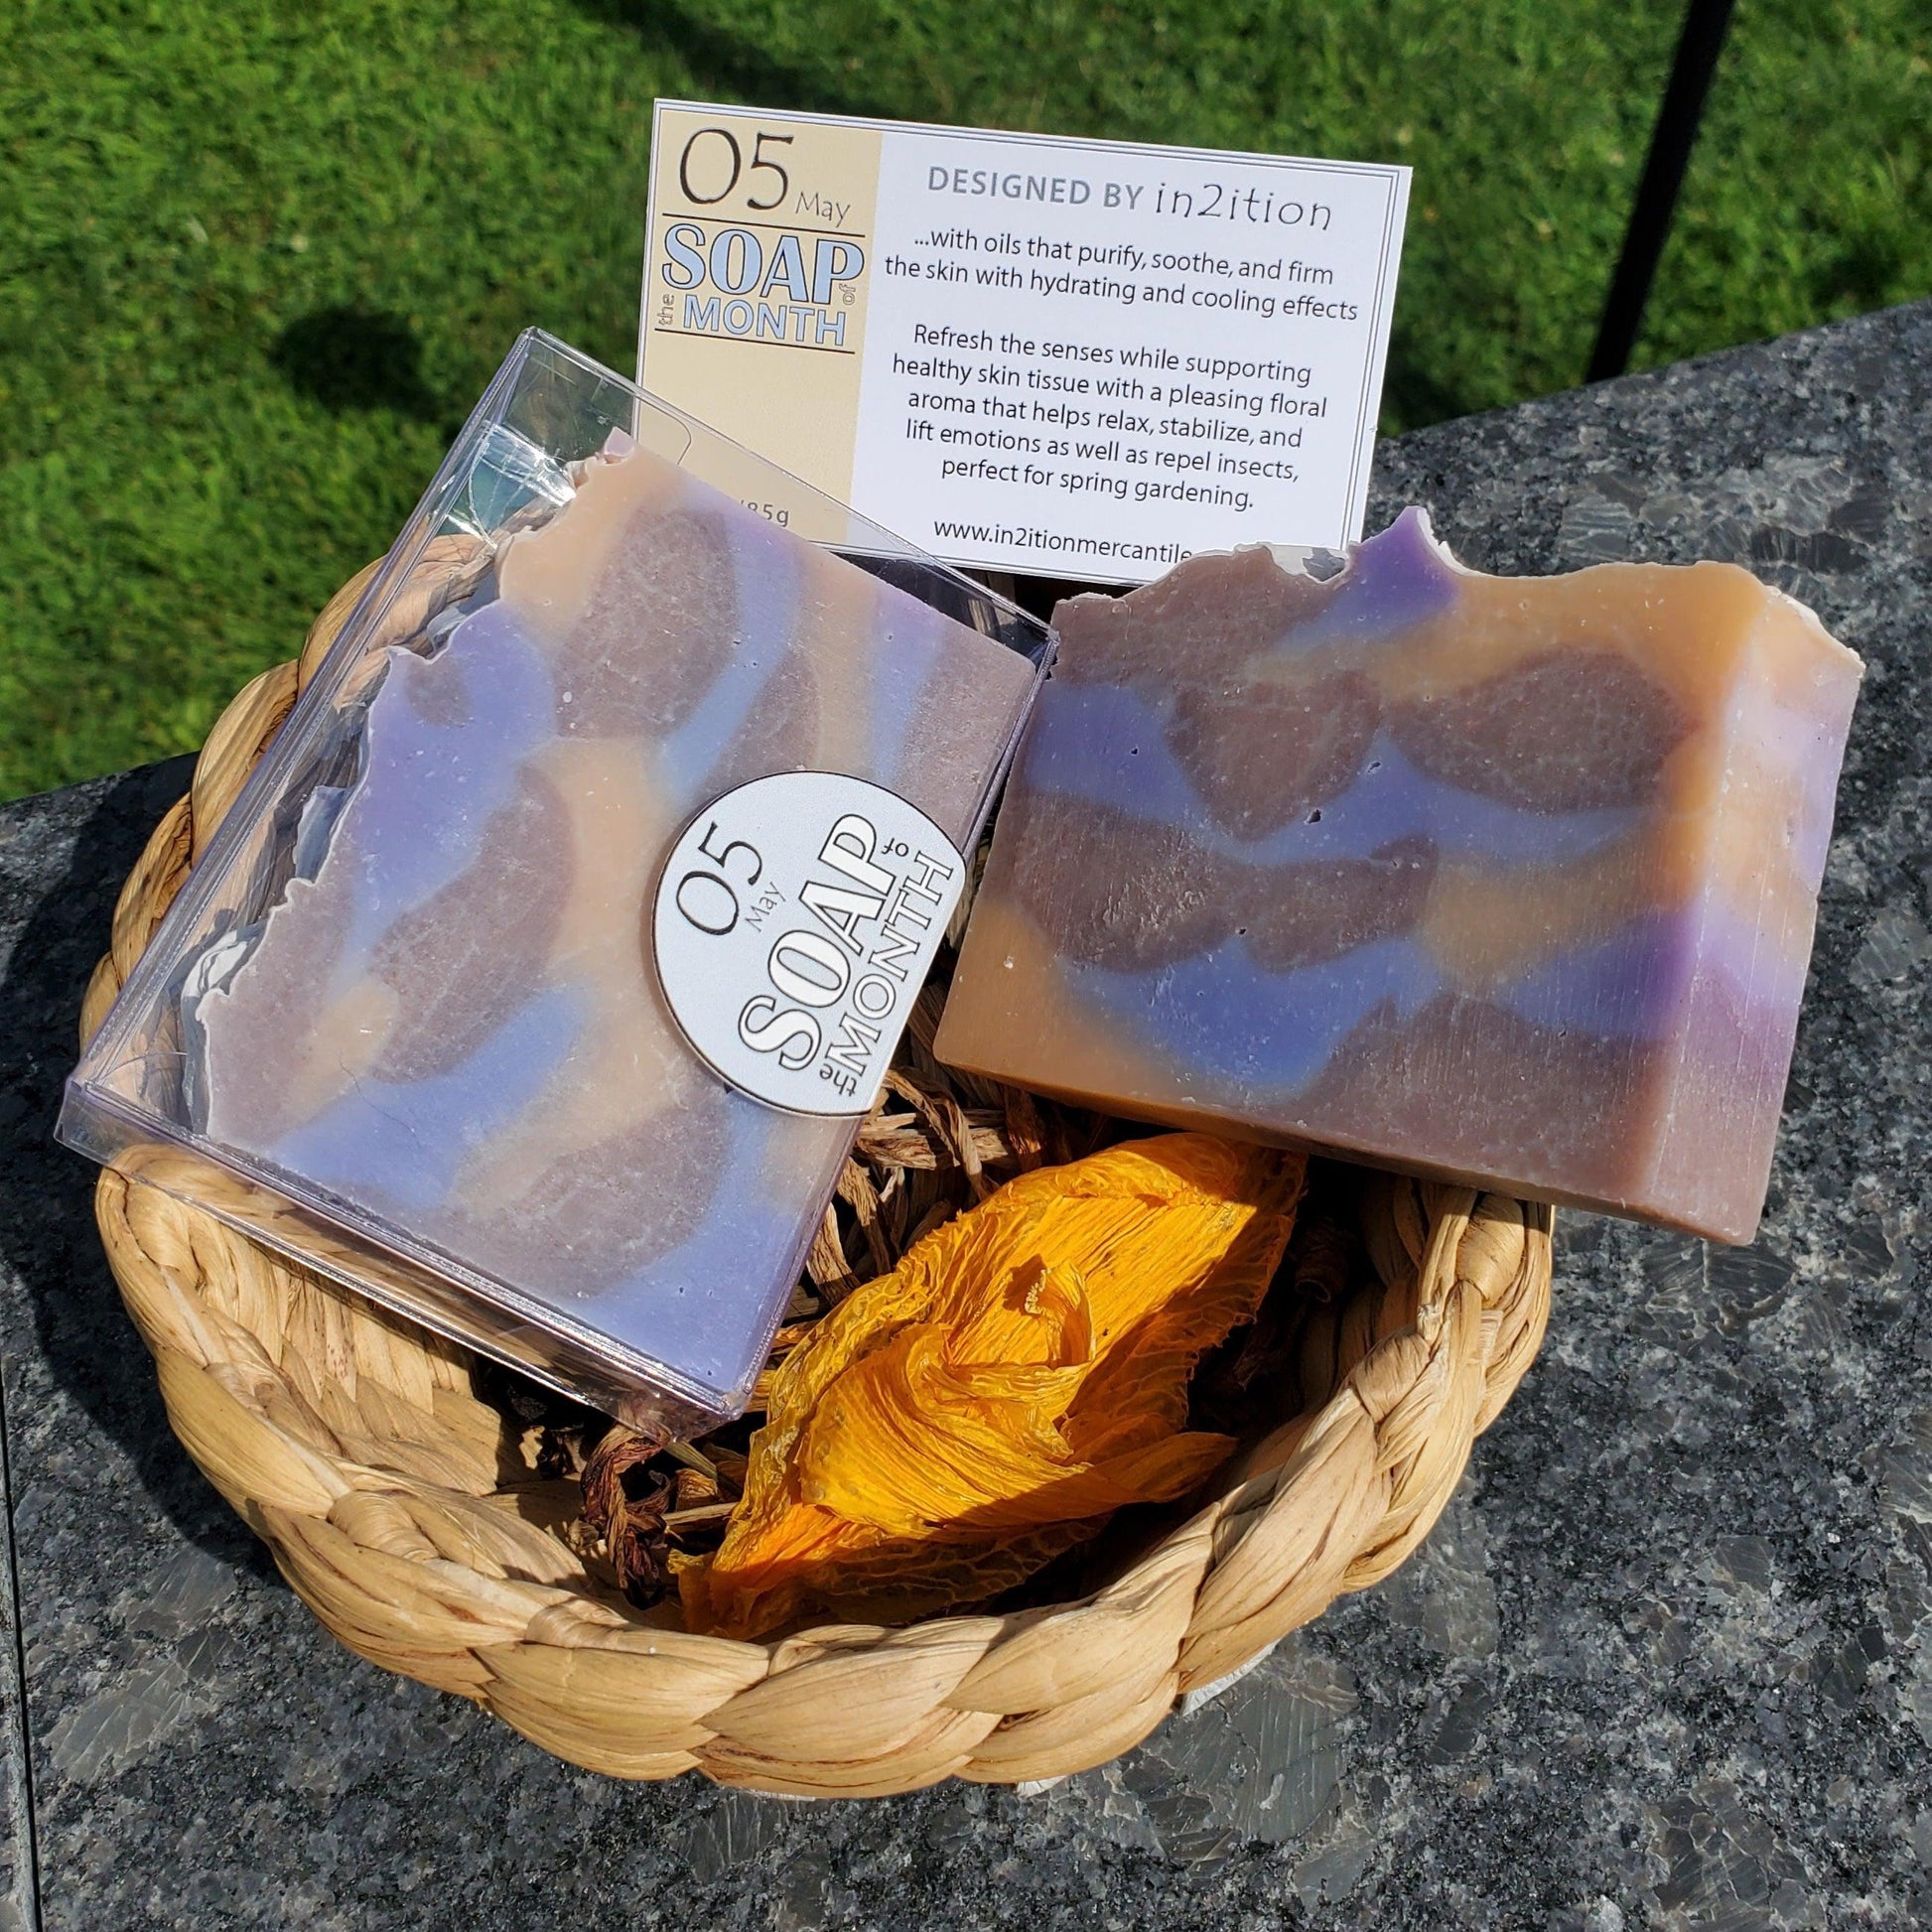 Soap of the Month-Wash-in2ition mercantile